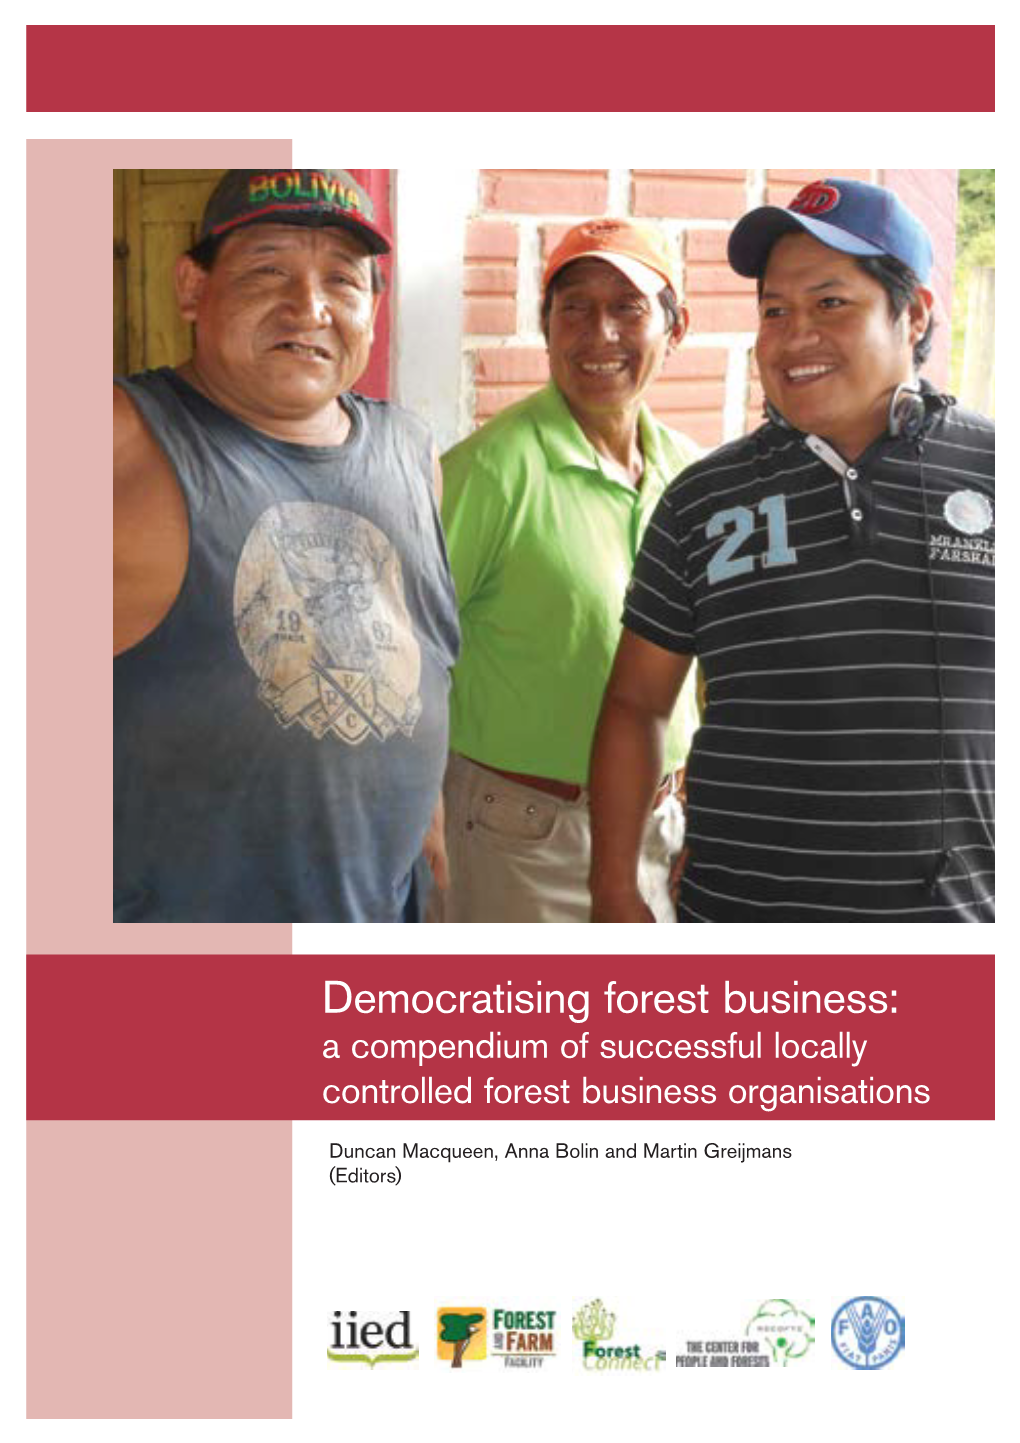 Democratising Forest Business: a Compendium of Successful Locally Controlled Forest Business Organisations